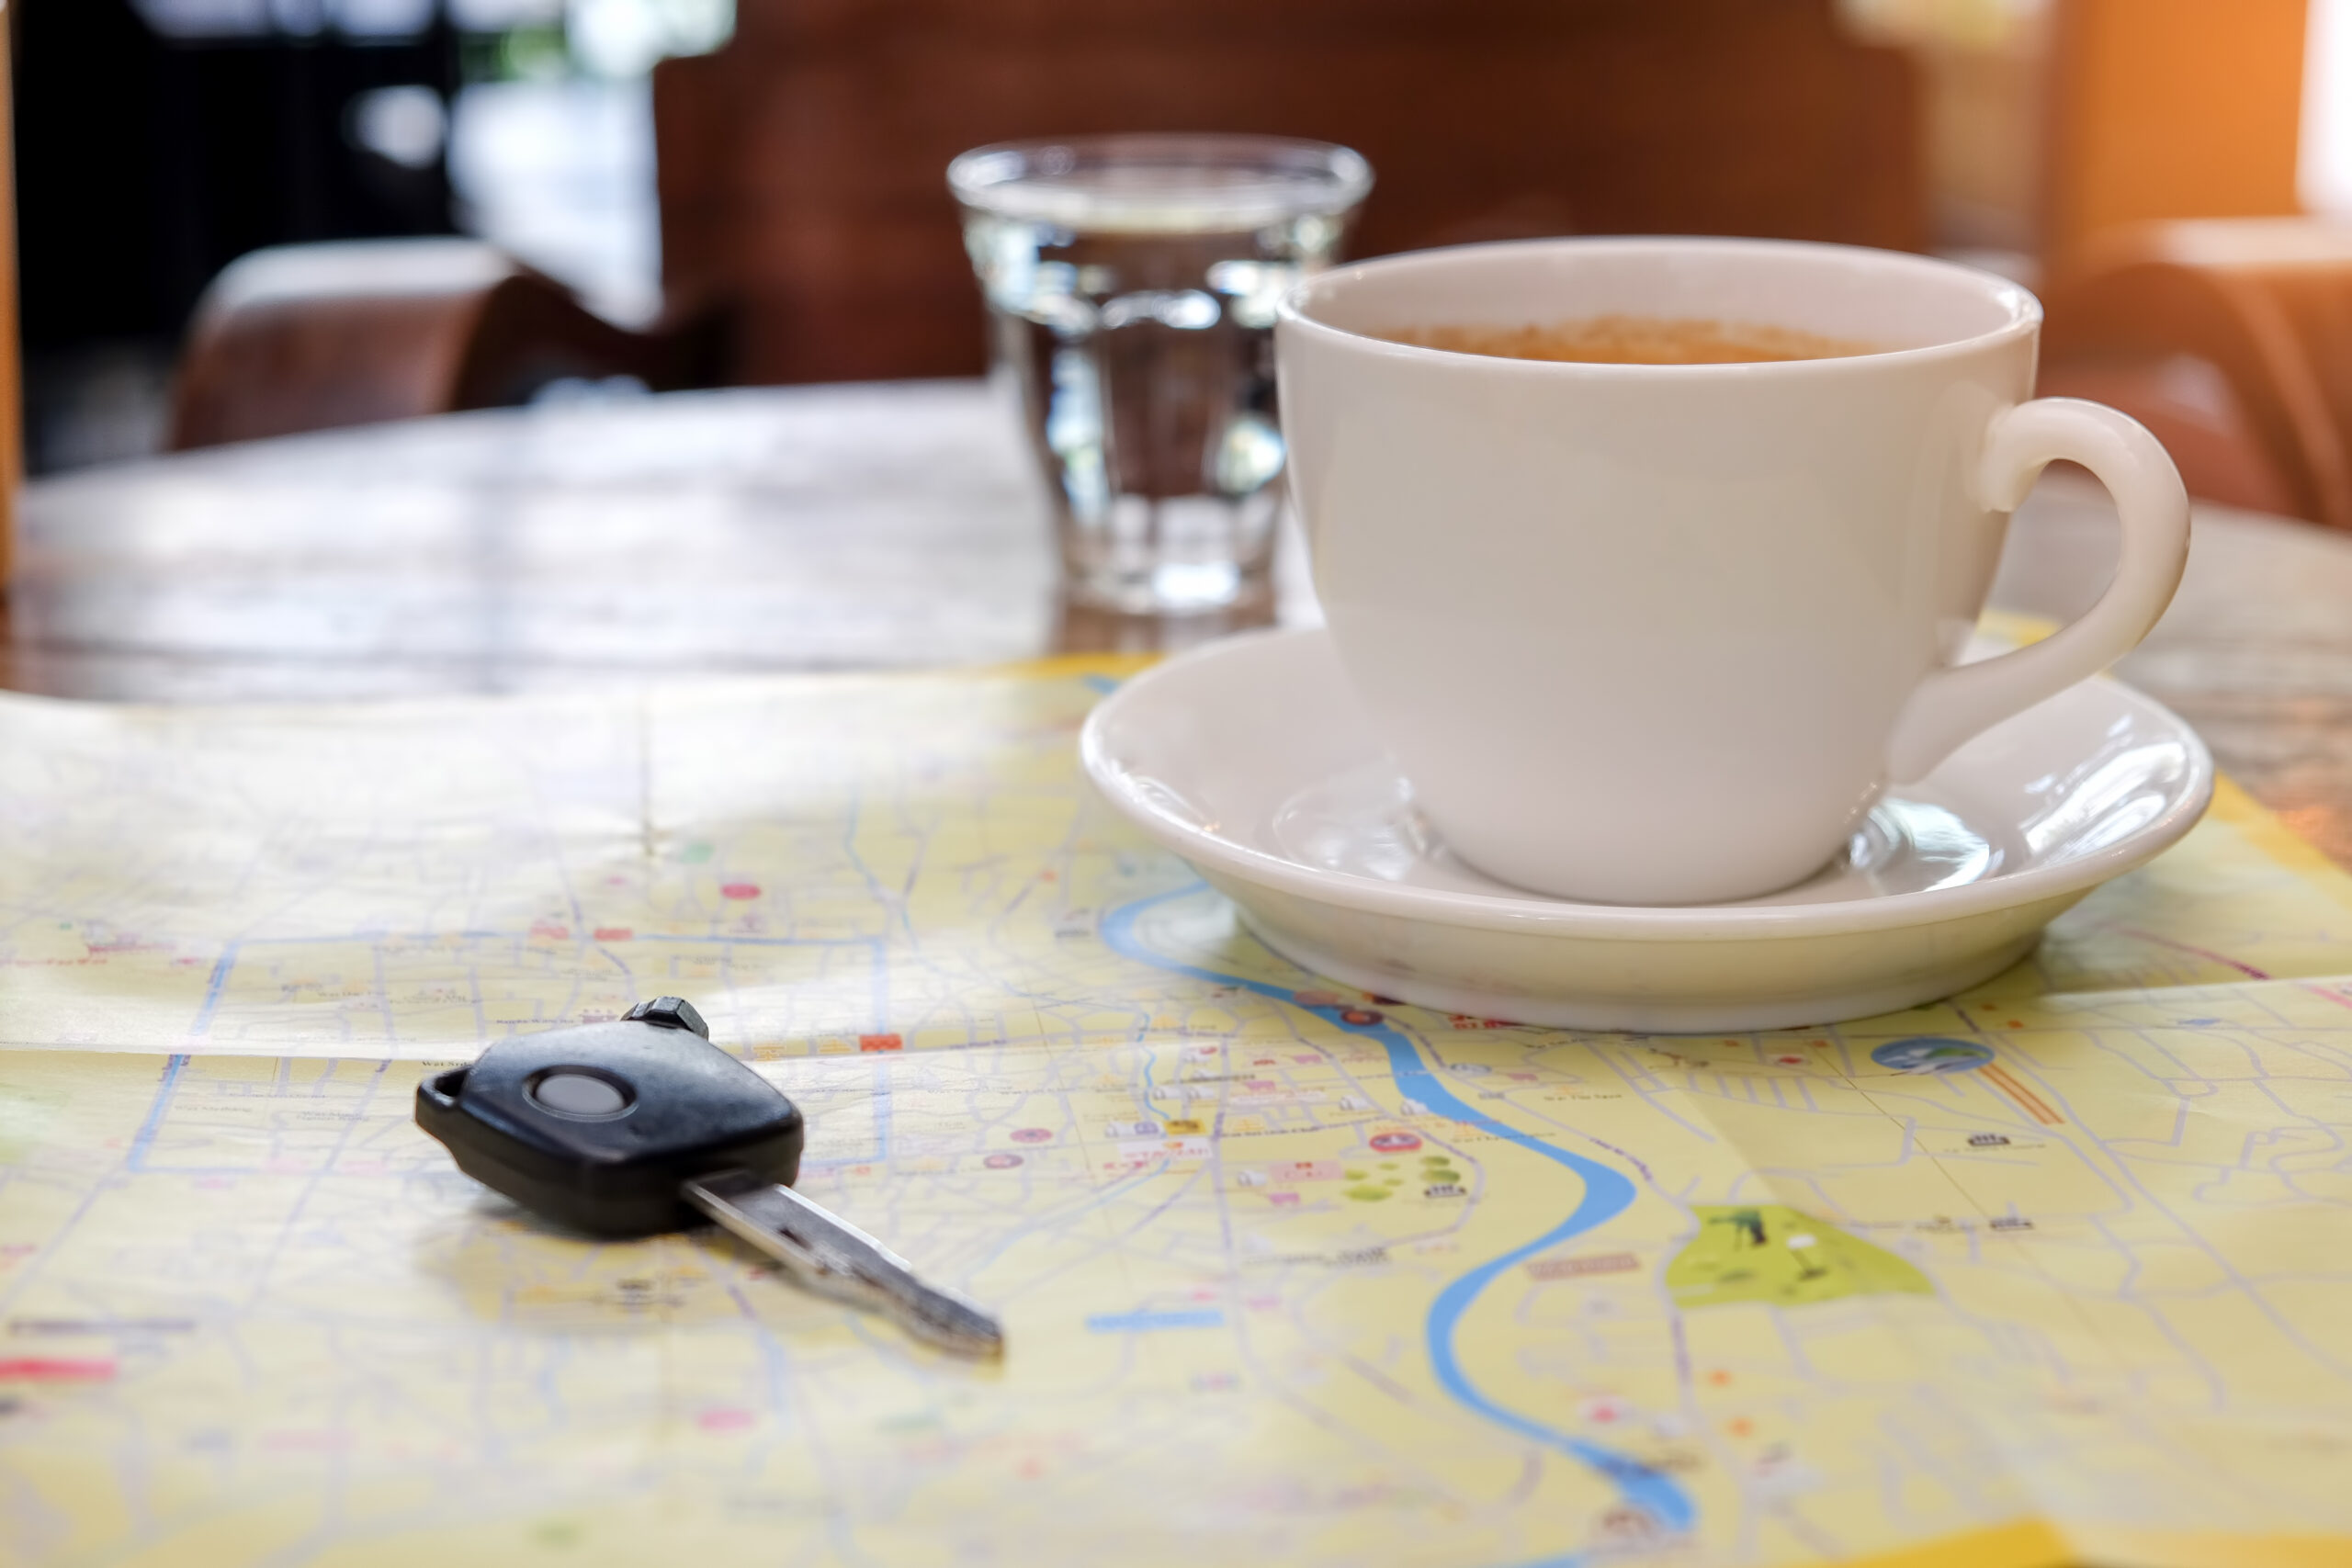 Guide to Motoring in Pretoria: Your Roadmap to Stress-Free Travel